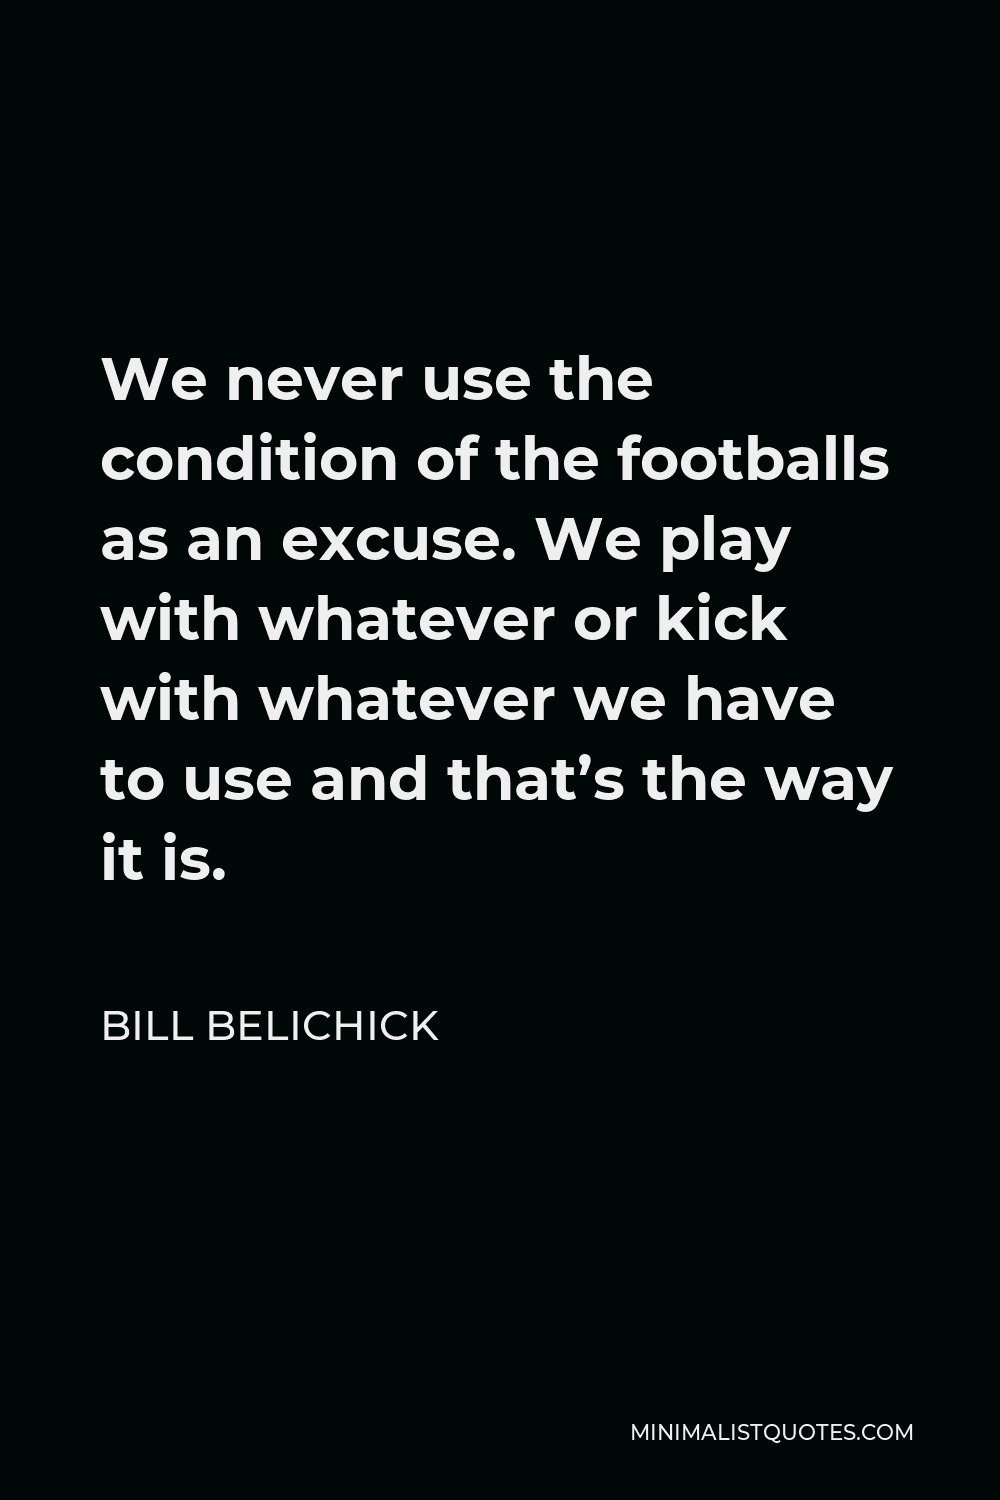 Bill Belichick Quote - We never use the condition of the footballs as an excuse. We play with whatever or kick with whatever we have to use and that’s the way it is.